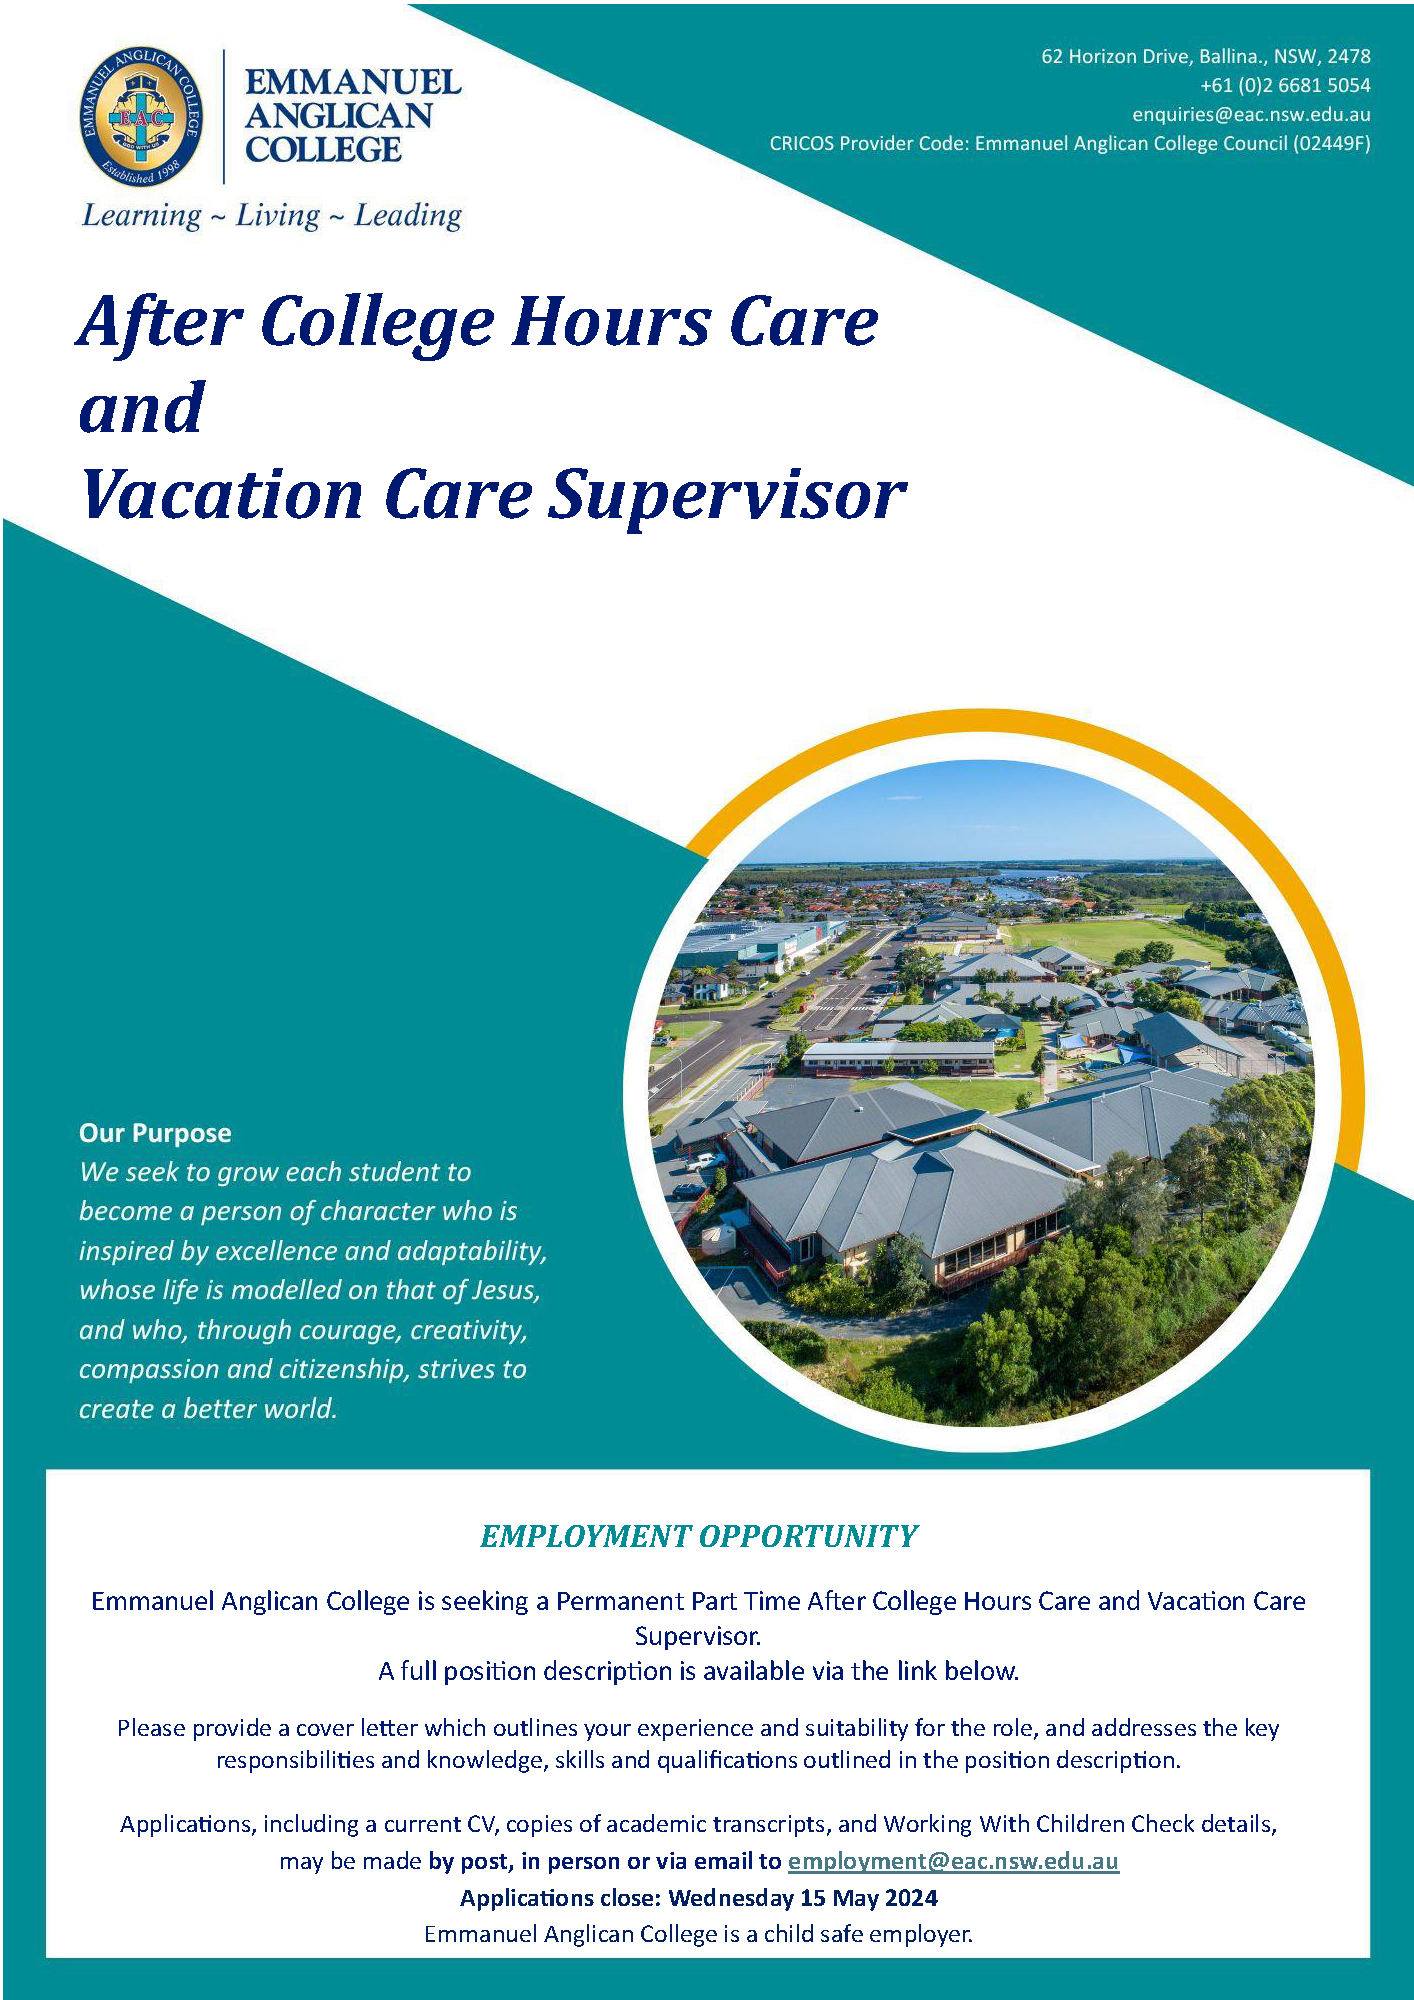 After College Hours Care and Vacation Care Supervisor